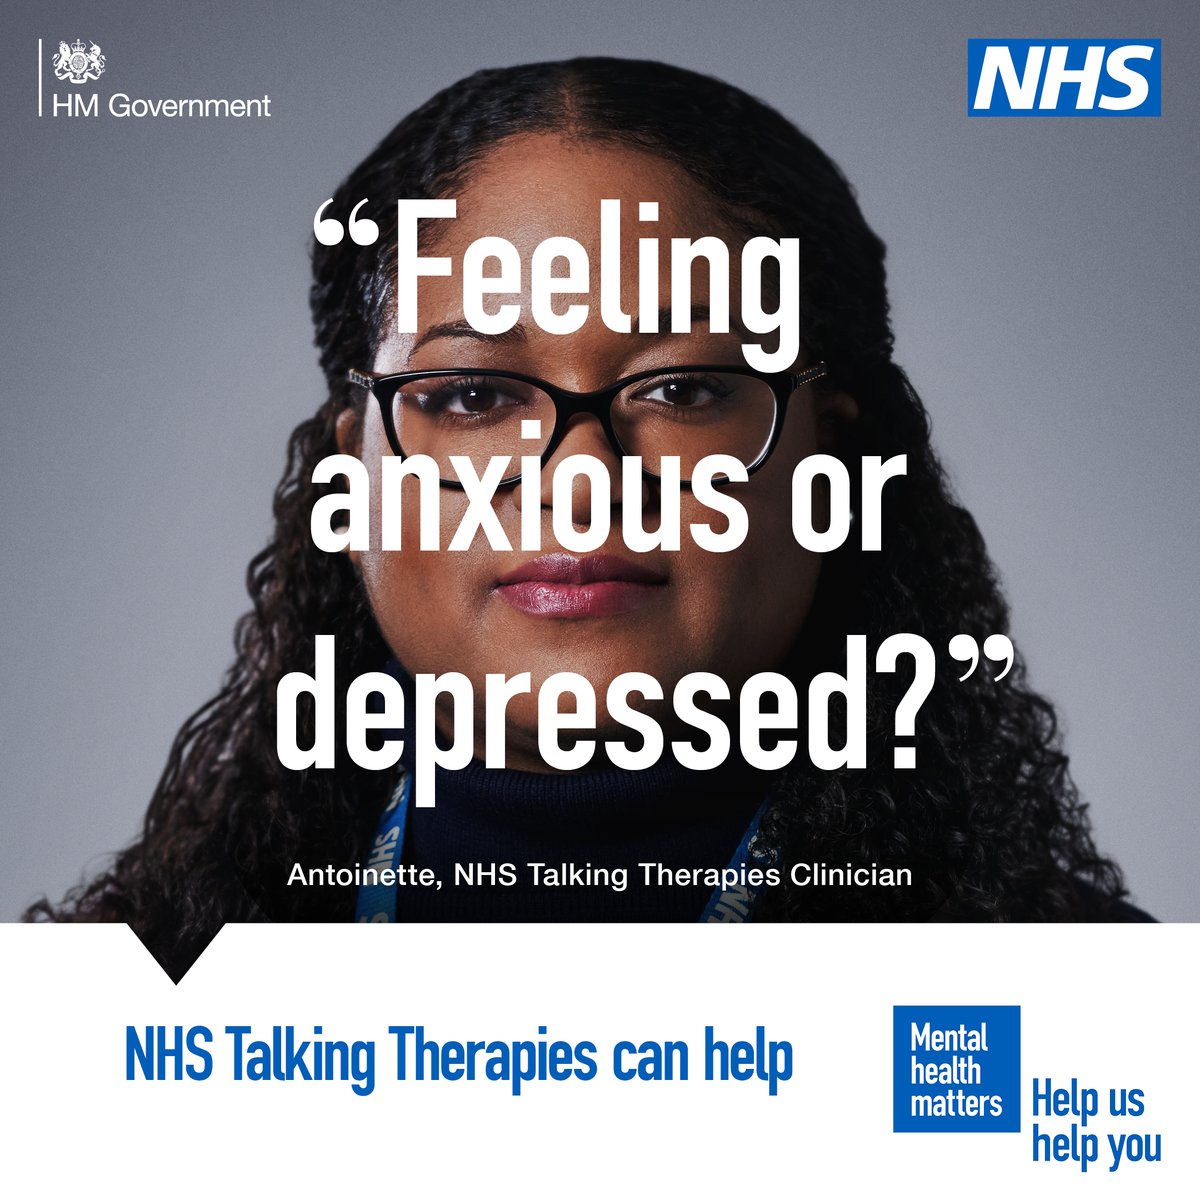 Struggling with feelings of depression, excessive worry, social anxiety, post-traumatic stress or obsessions and compulsions? NHS Talking Therapies can help. The service is effective, confidential and free. Your GP can refer you or refer yourself at nhs.uk/talk.